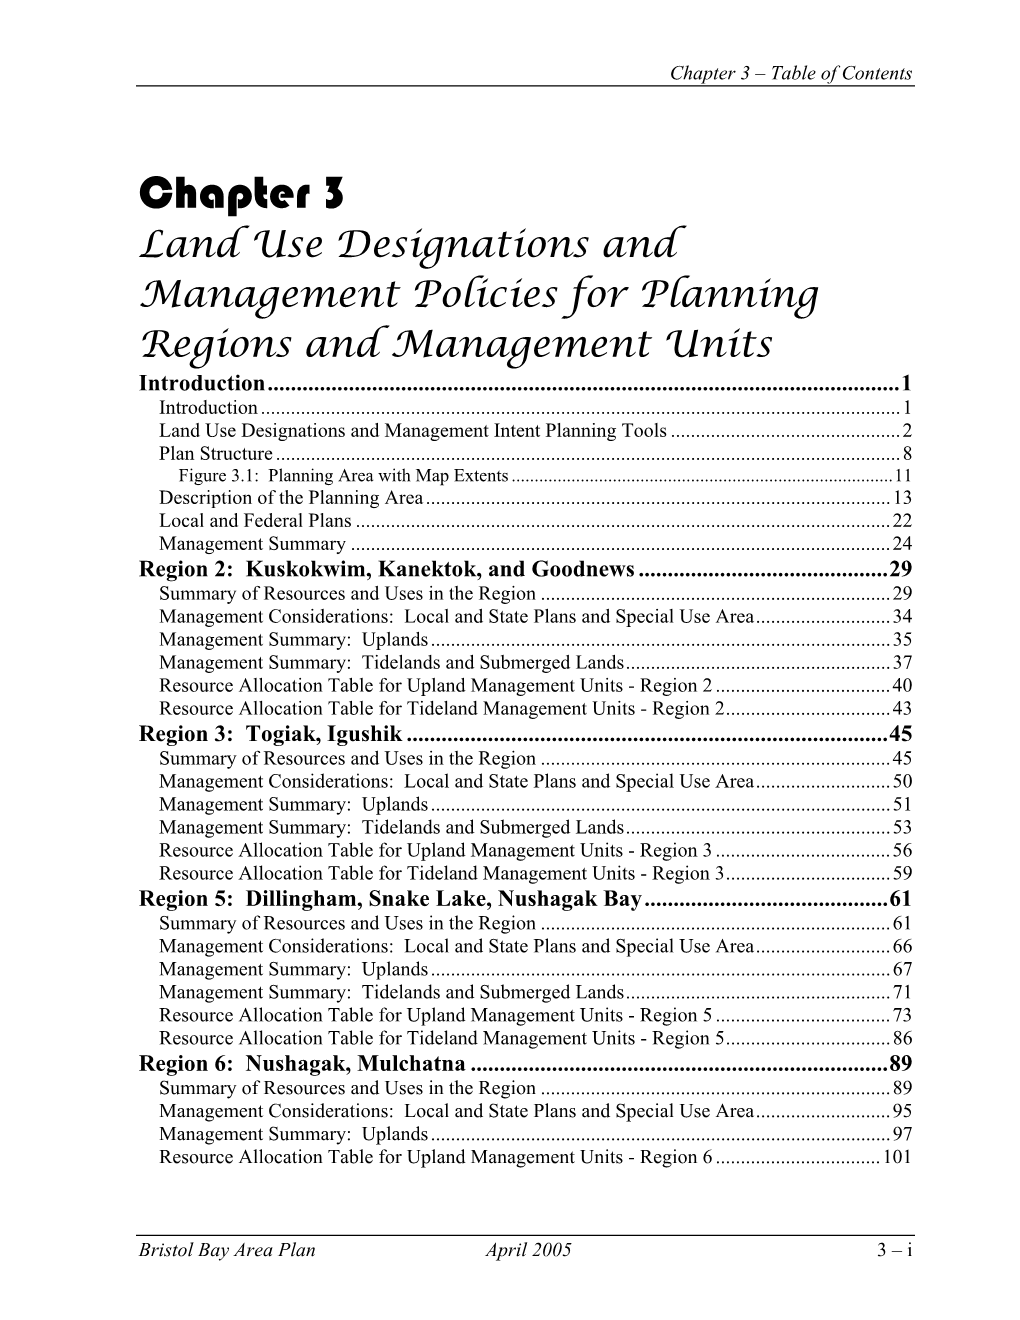 Chapter 3: Land Use Designations and Management Policies for Planning Regions and Management Units